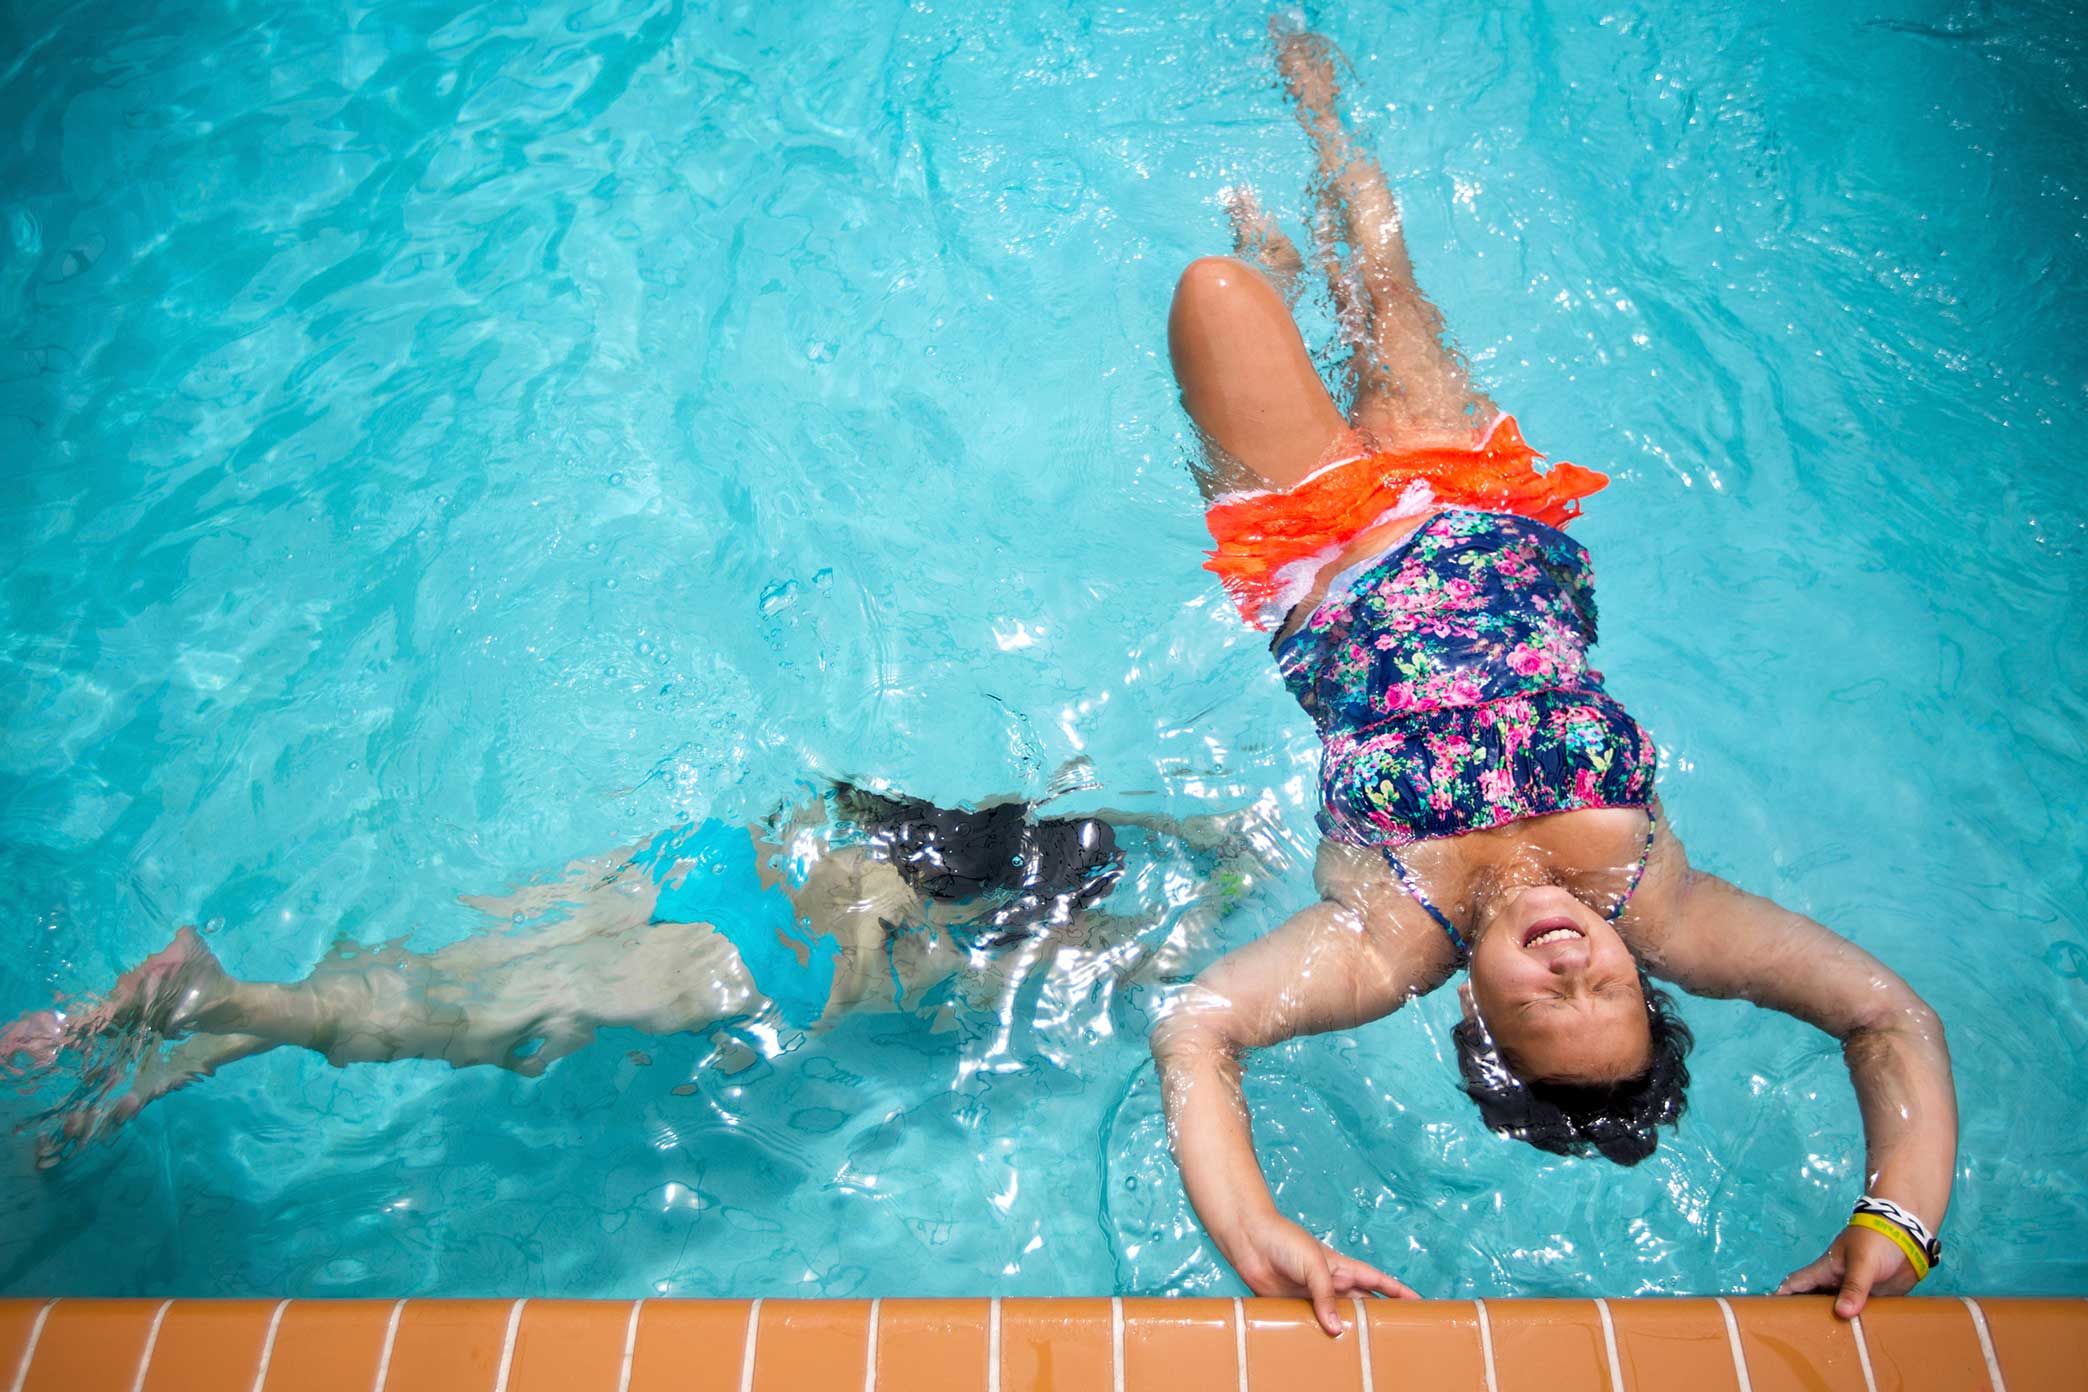  Faith Brown and her cousin Sami Russell play in the swimming pool at her home in Brooksville, Florida. "We swim everyday and play games in the pool. Its so much fun. I'm hoping to be on the swim team at my high school," said Faith. 14 year old Faith